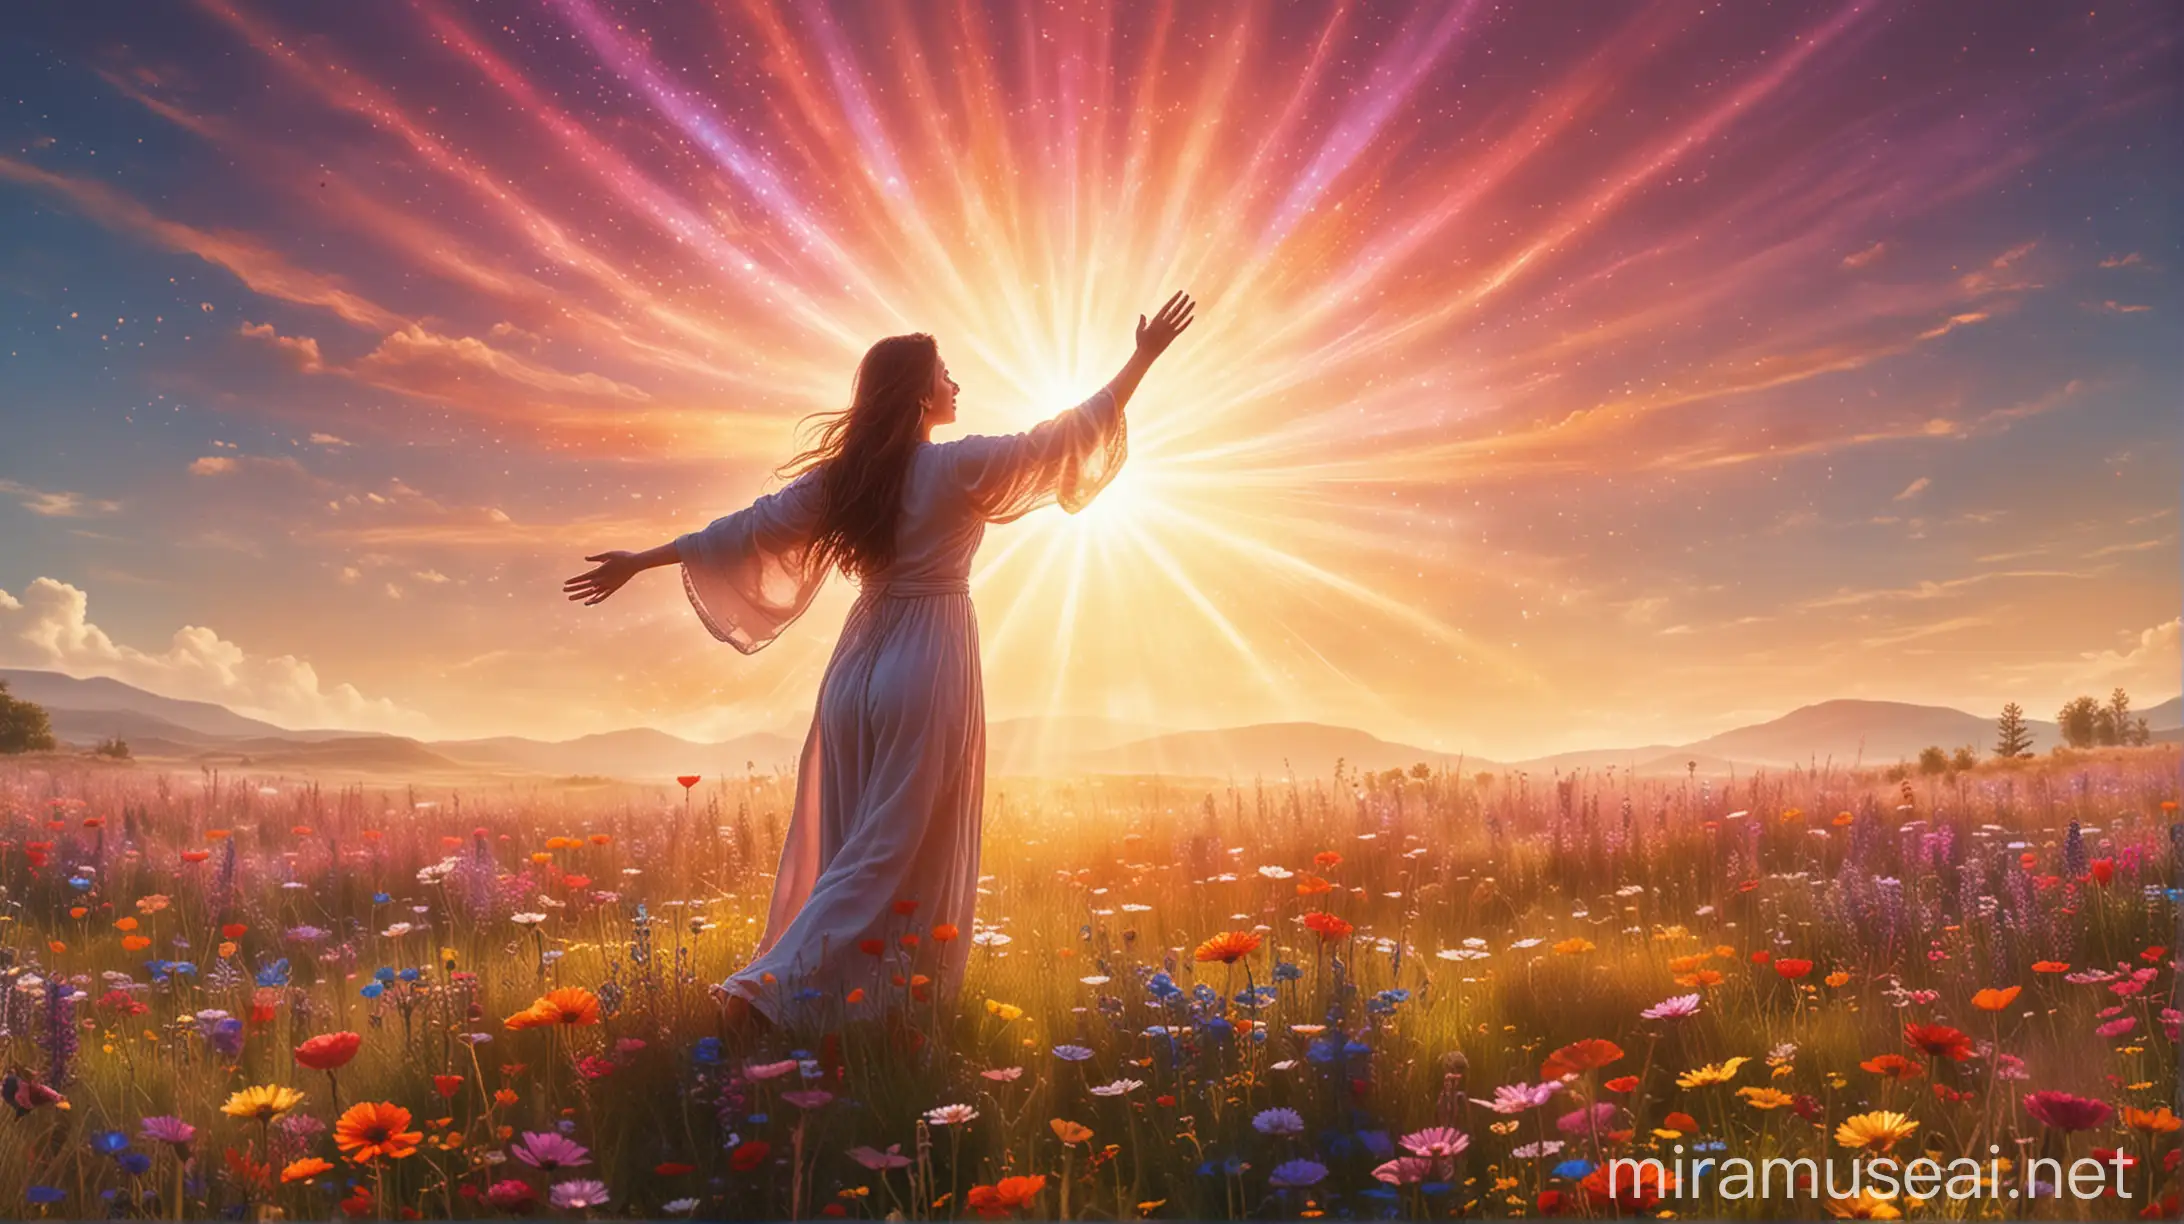 Mystical Woman Embracing Sunlight in Vibrant Meadow